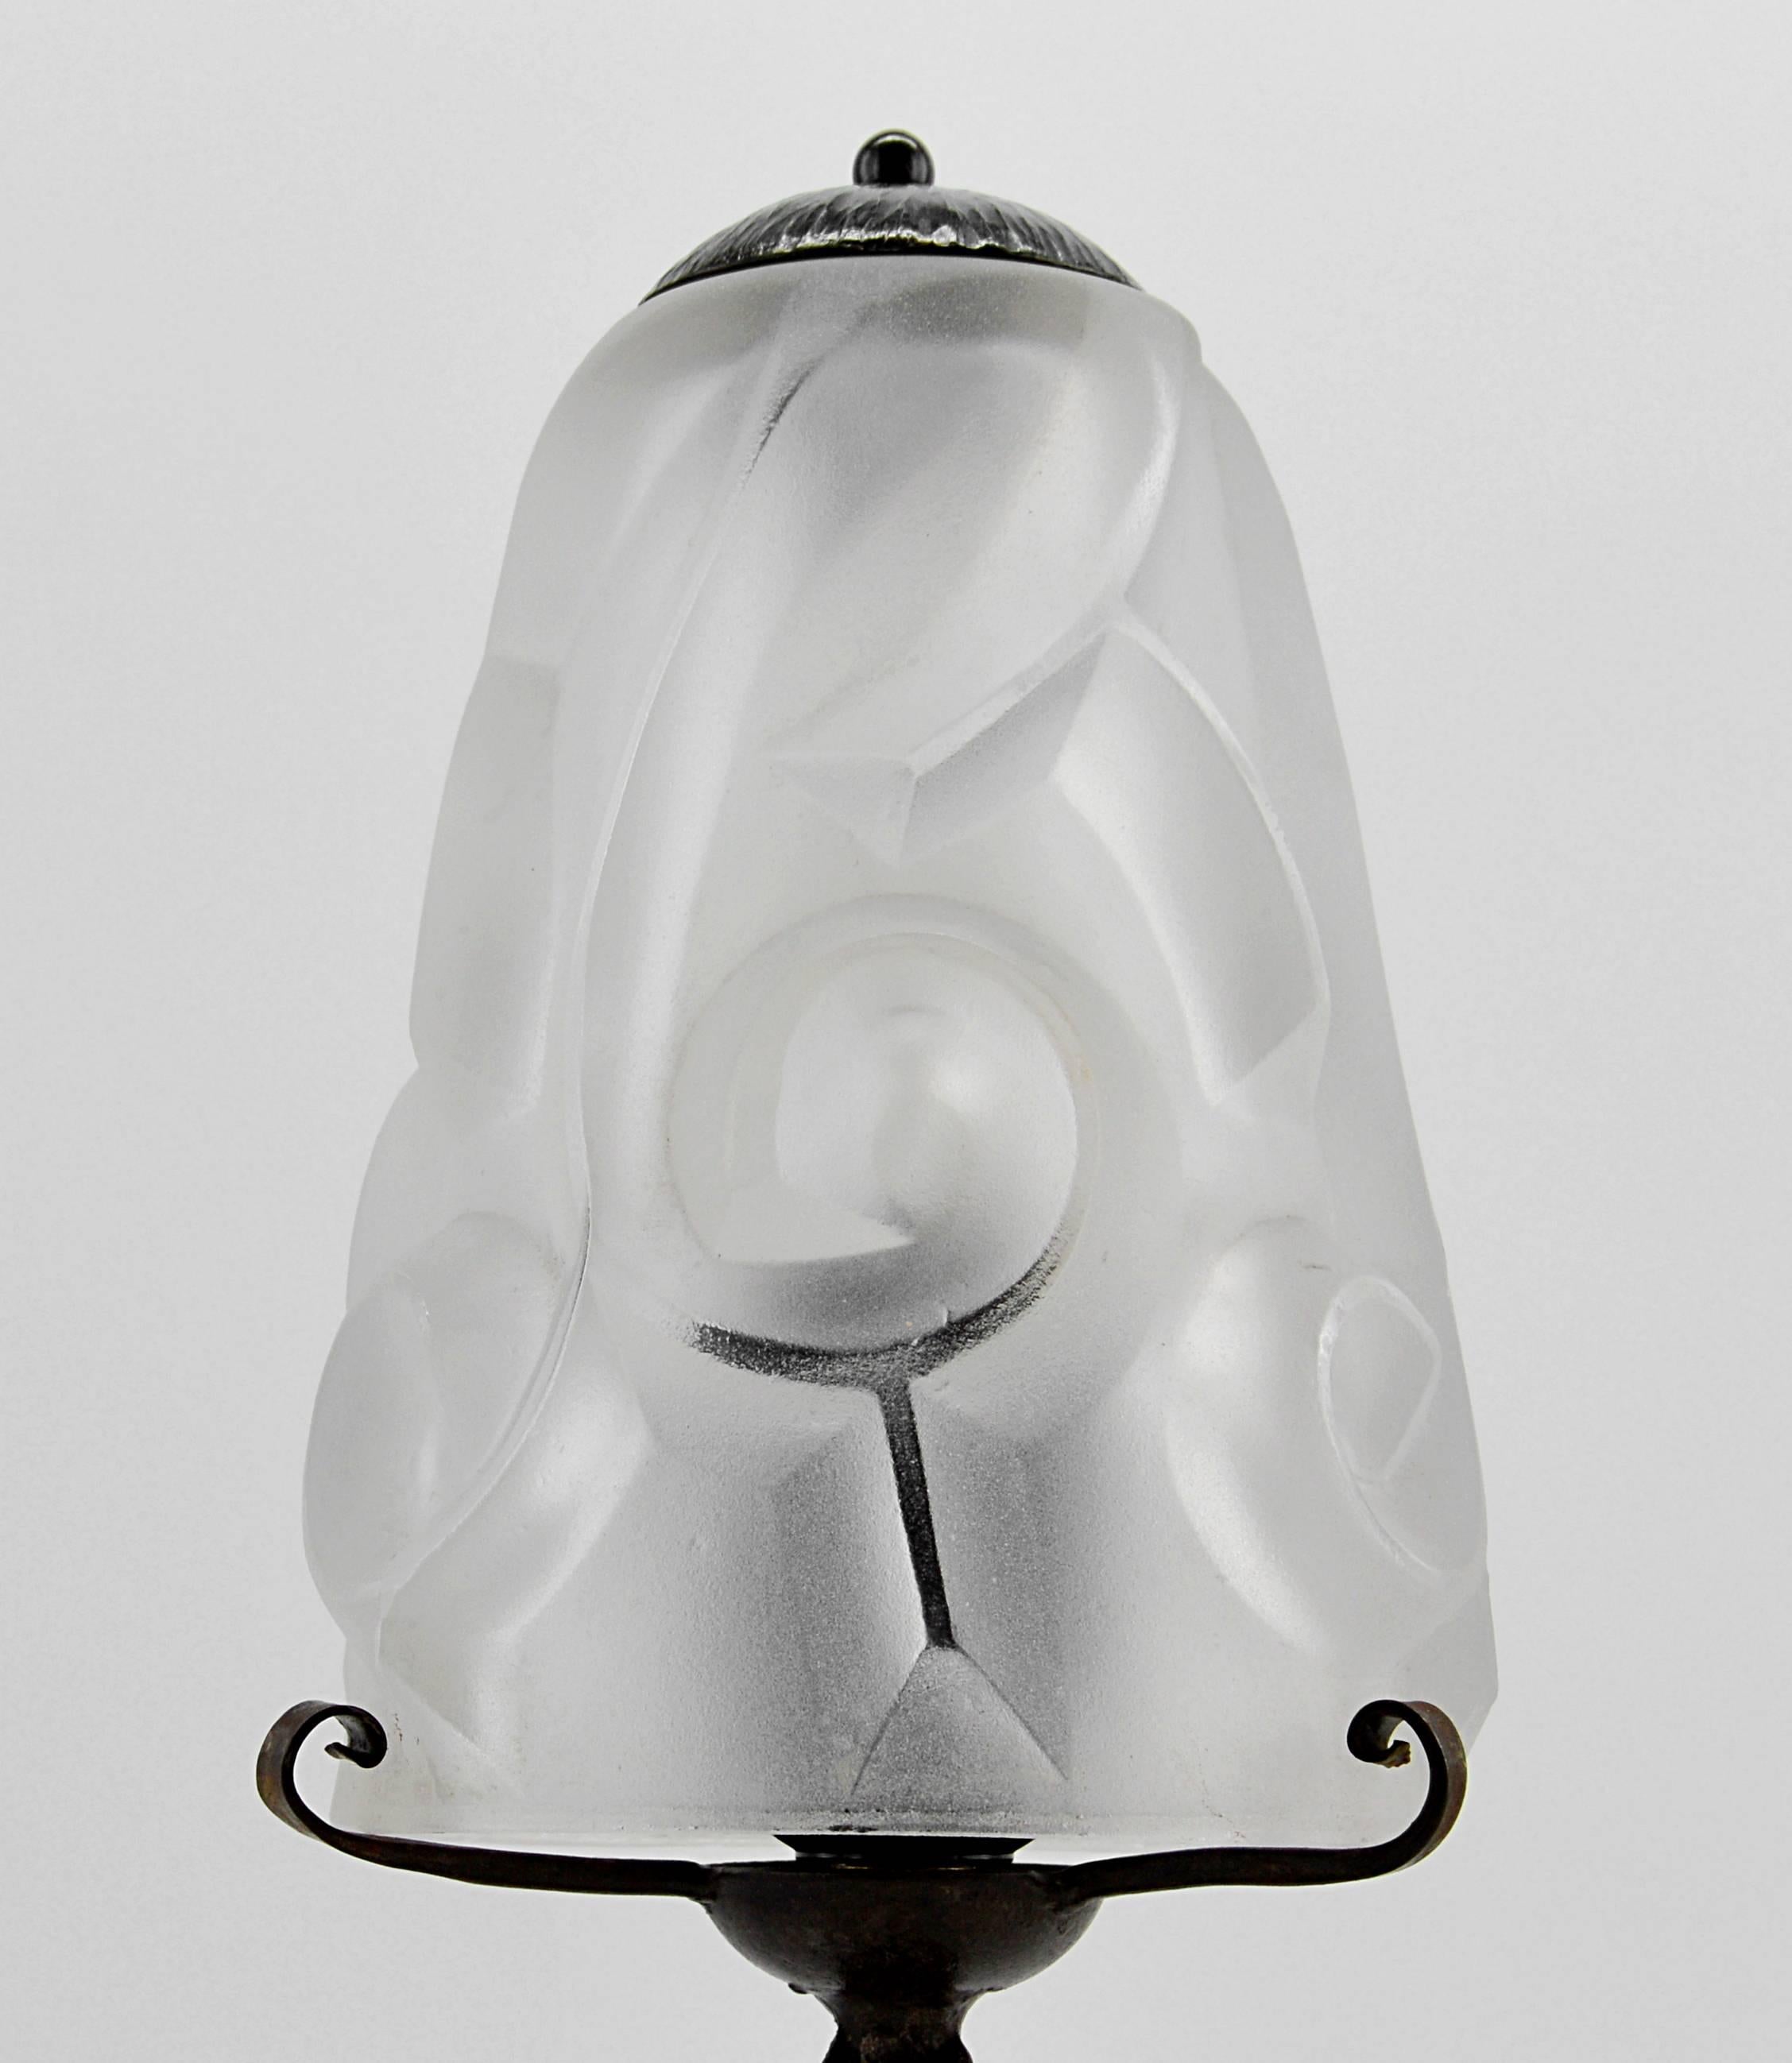 Molded Edouard Cazaux French Art Deco Table Lamp at Degue's, 1928-1930